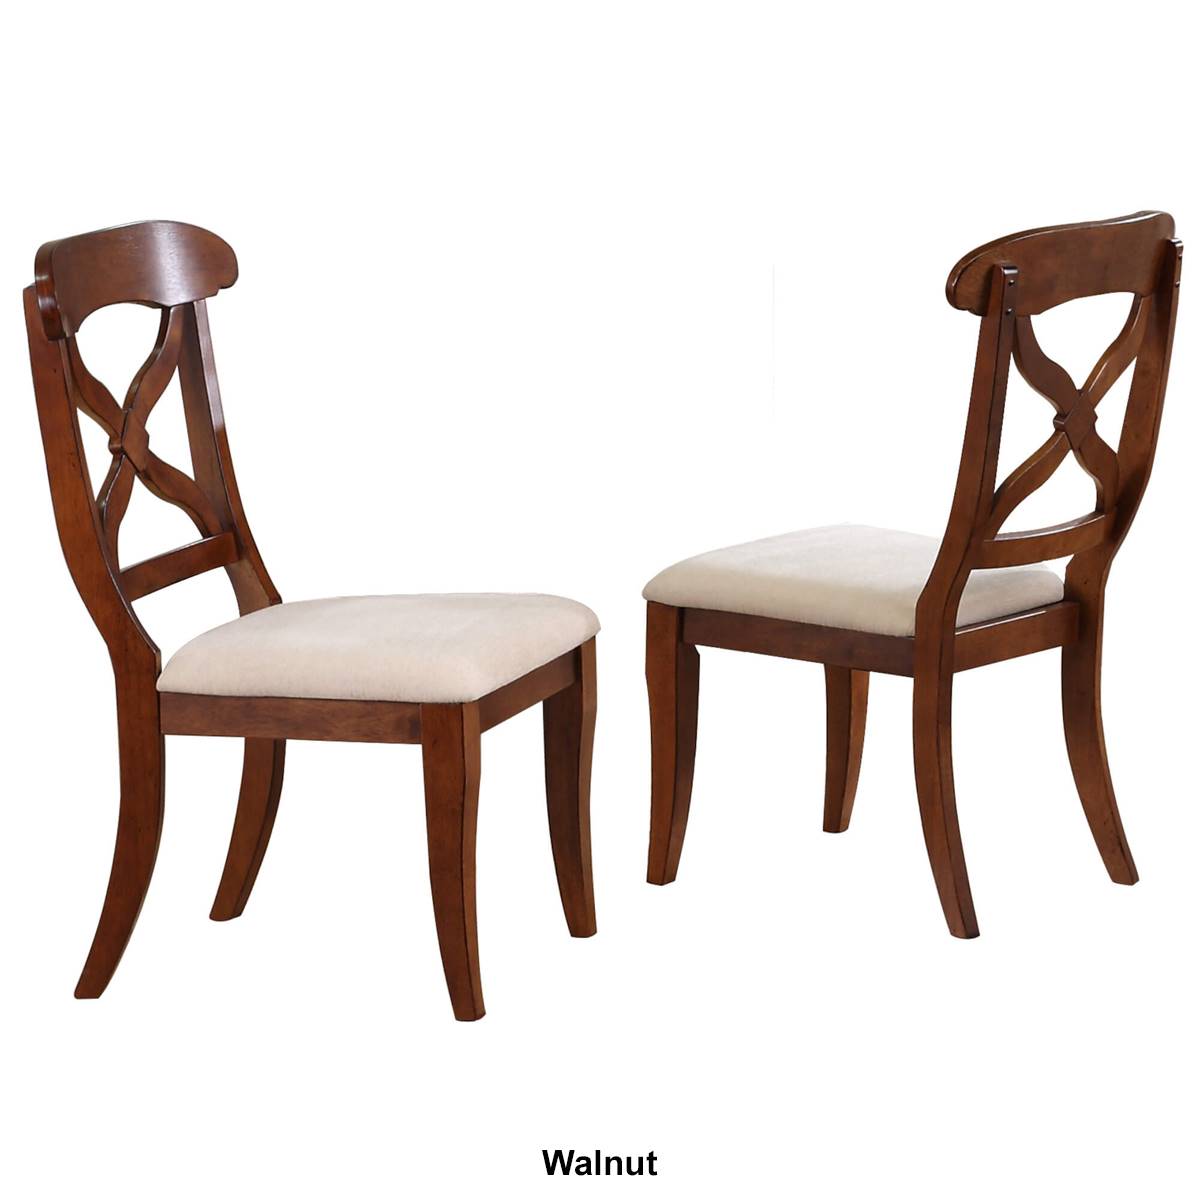 Besthom Andrews Distressed Upholstered Side Chairs - Set Of 2